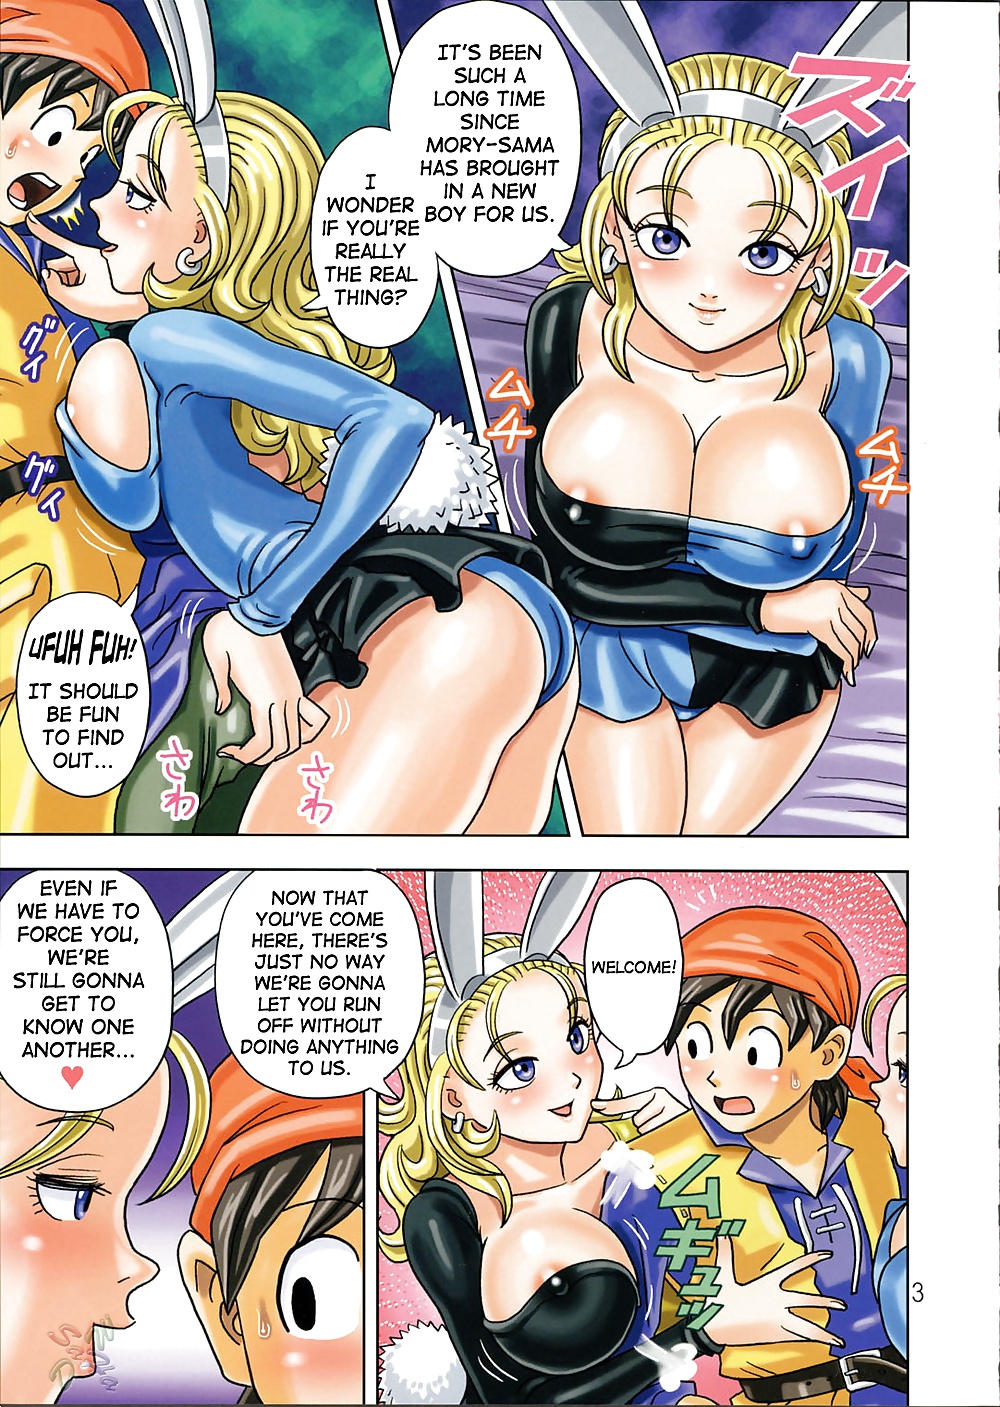 Perverted Hentai comic of Girls in Hot Skimpy outfits! #9350222